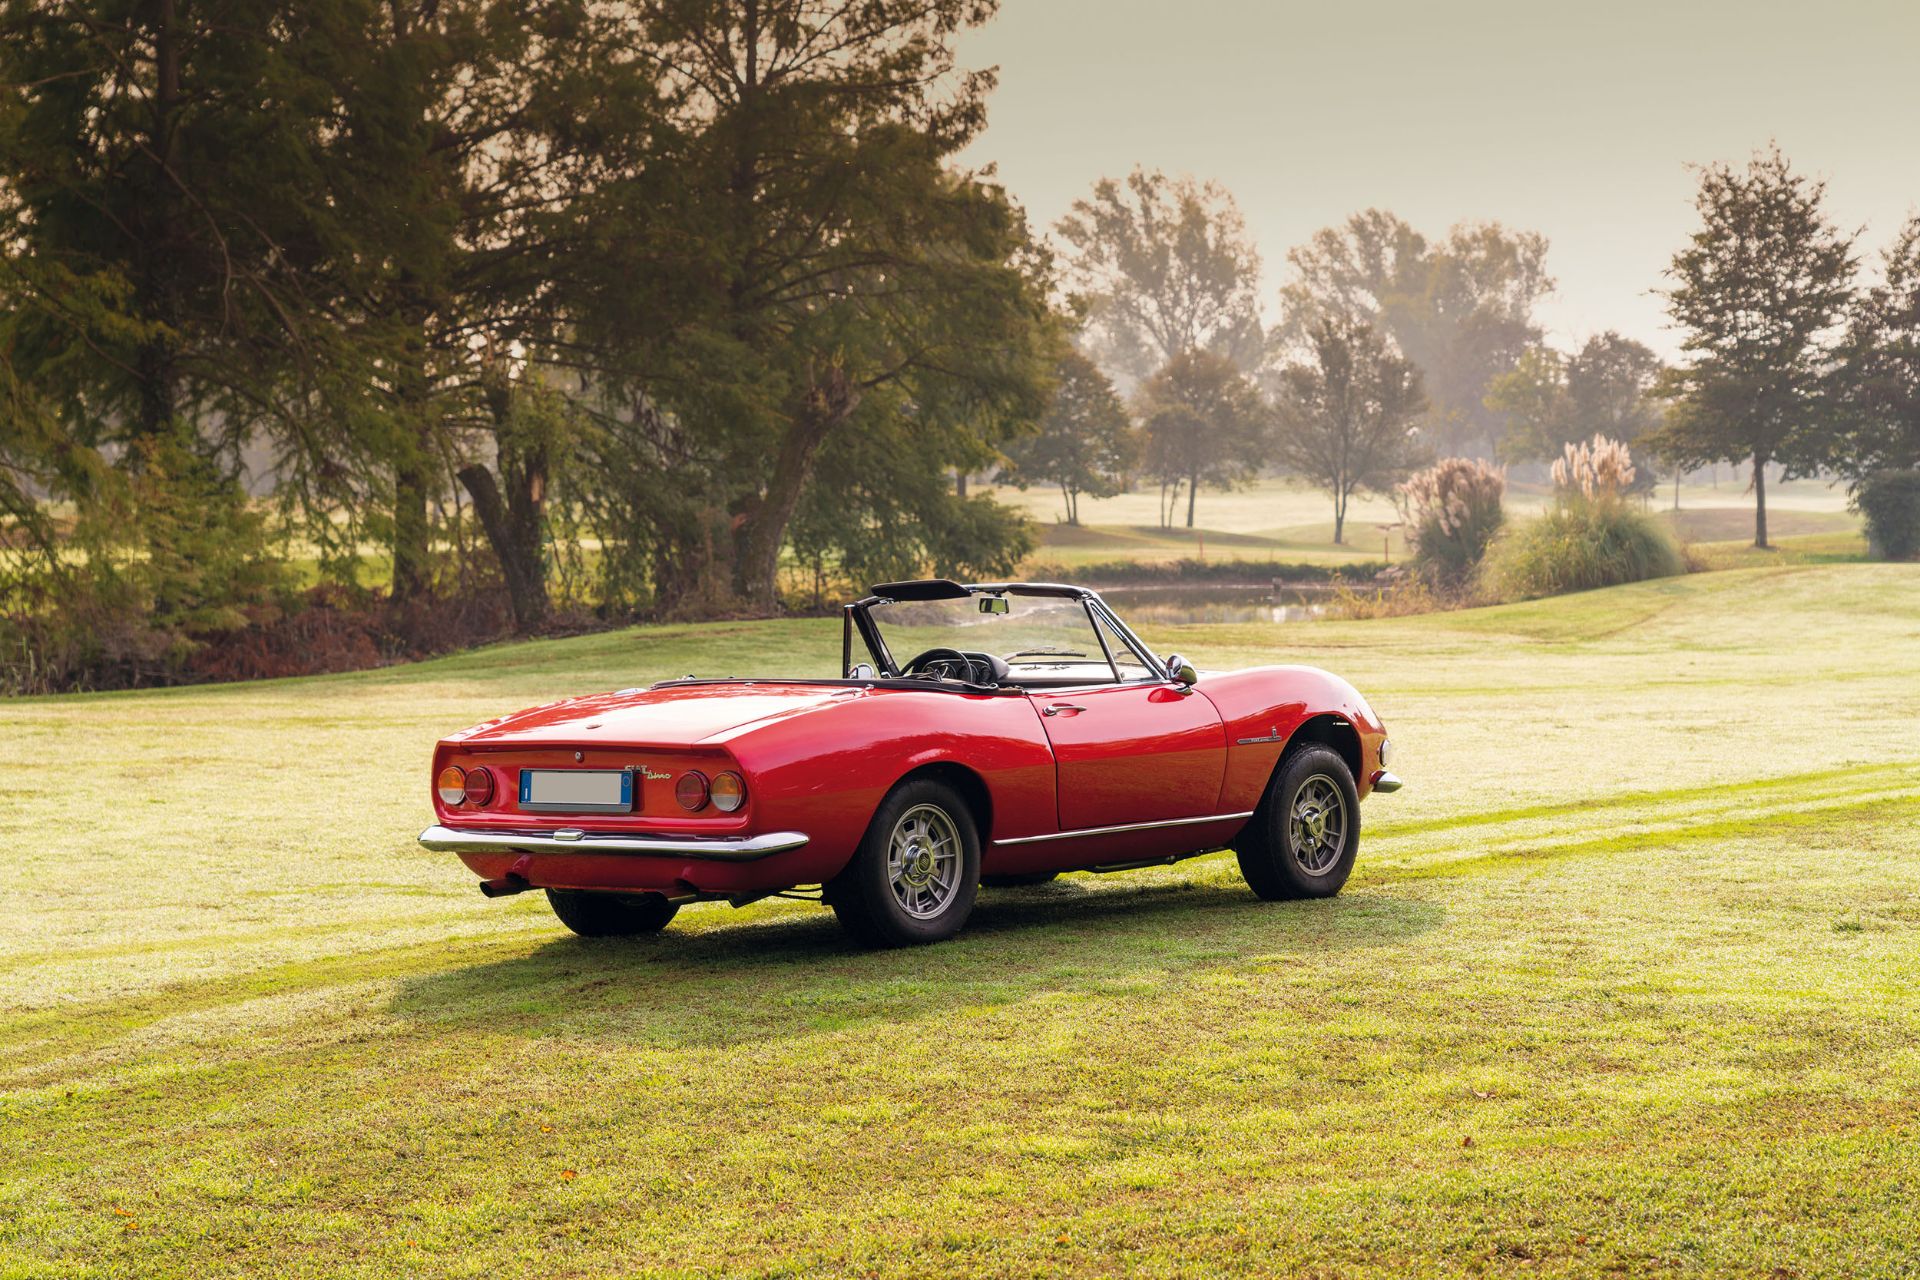 1967 FIAT DINO SPIDER 2000 (TIPO 135 AS)